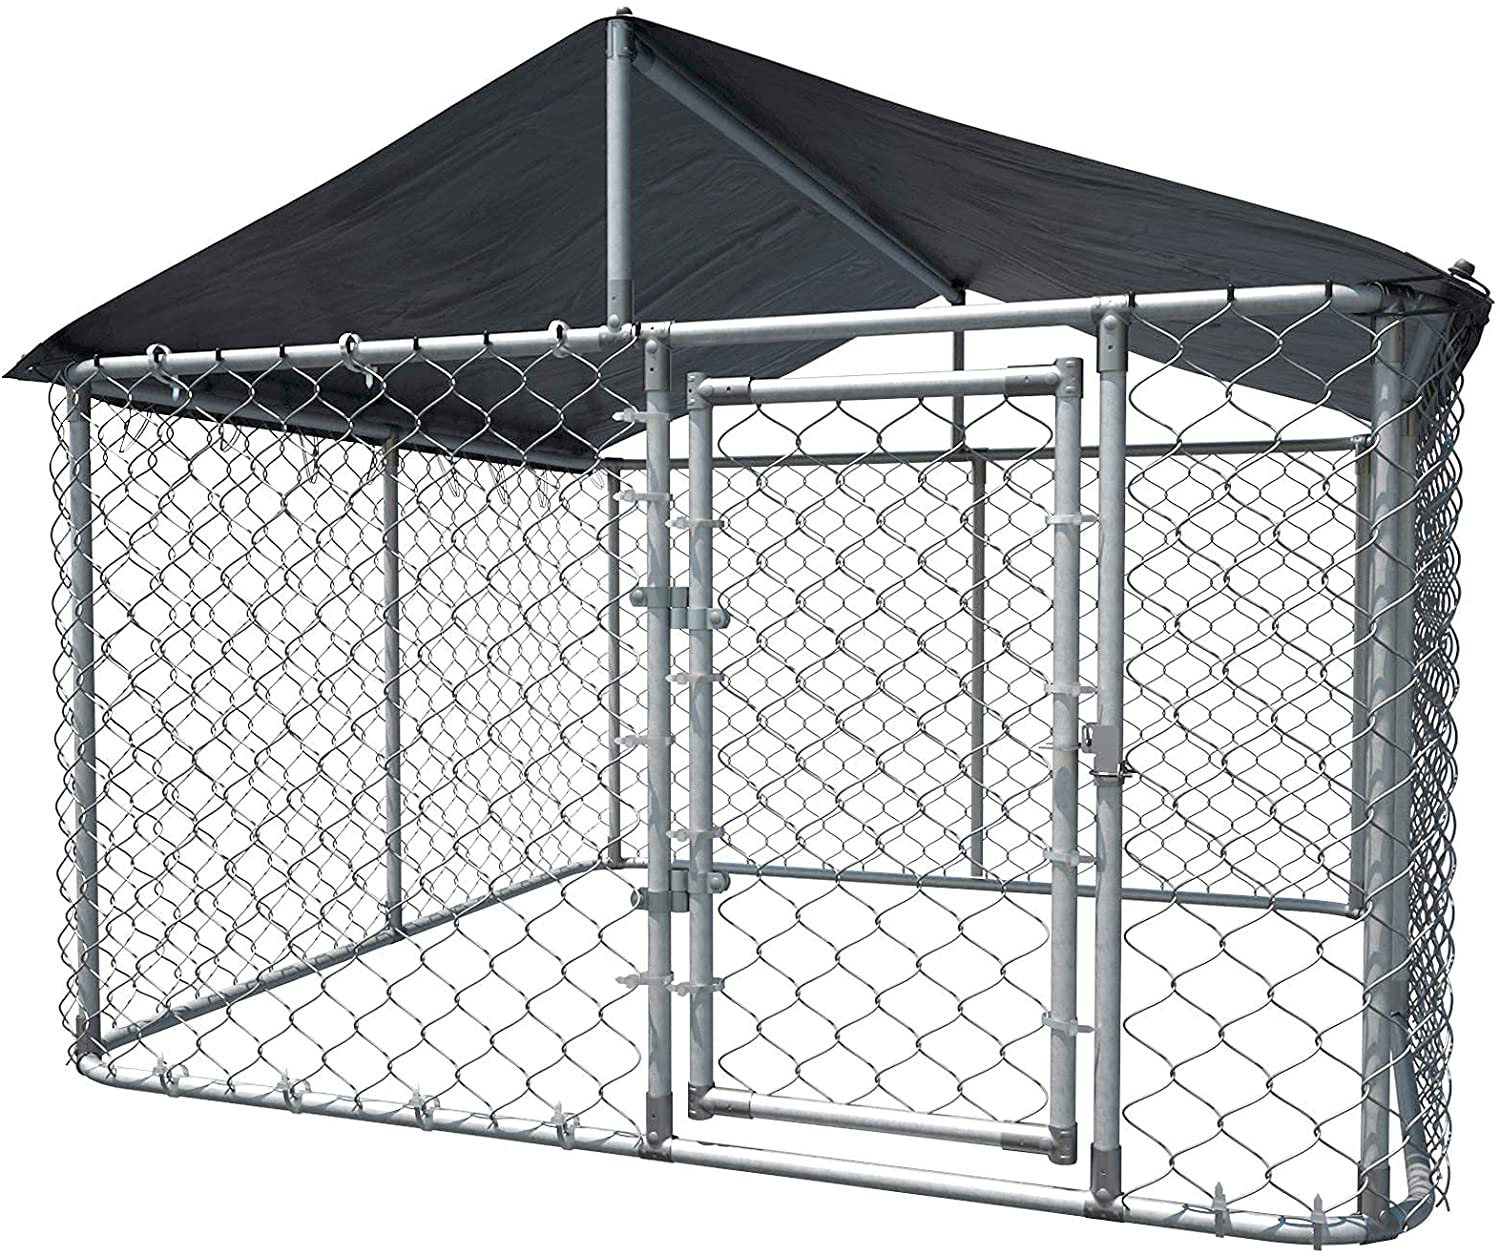 AKANORS Outdoor Chain Link Dog Kennel with Weatherproof Cover - Large Heavy Duty Pet House Run Exercise Playpen for Training - Chicken Coop Hen Cage Durable Galvanized Steel Frame Animals & Pet Supplies > Pet Supplies > Dog Supplies > Dog Kennels & Runs AKANORS   